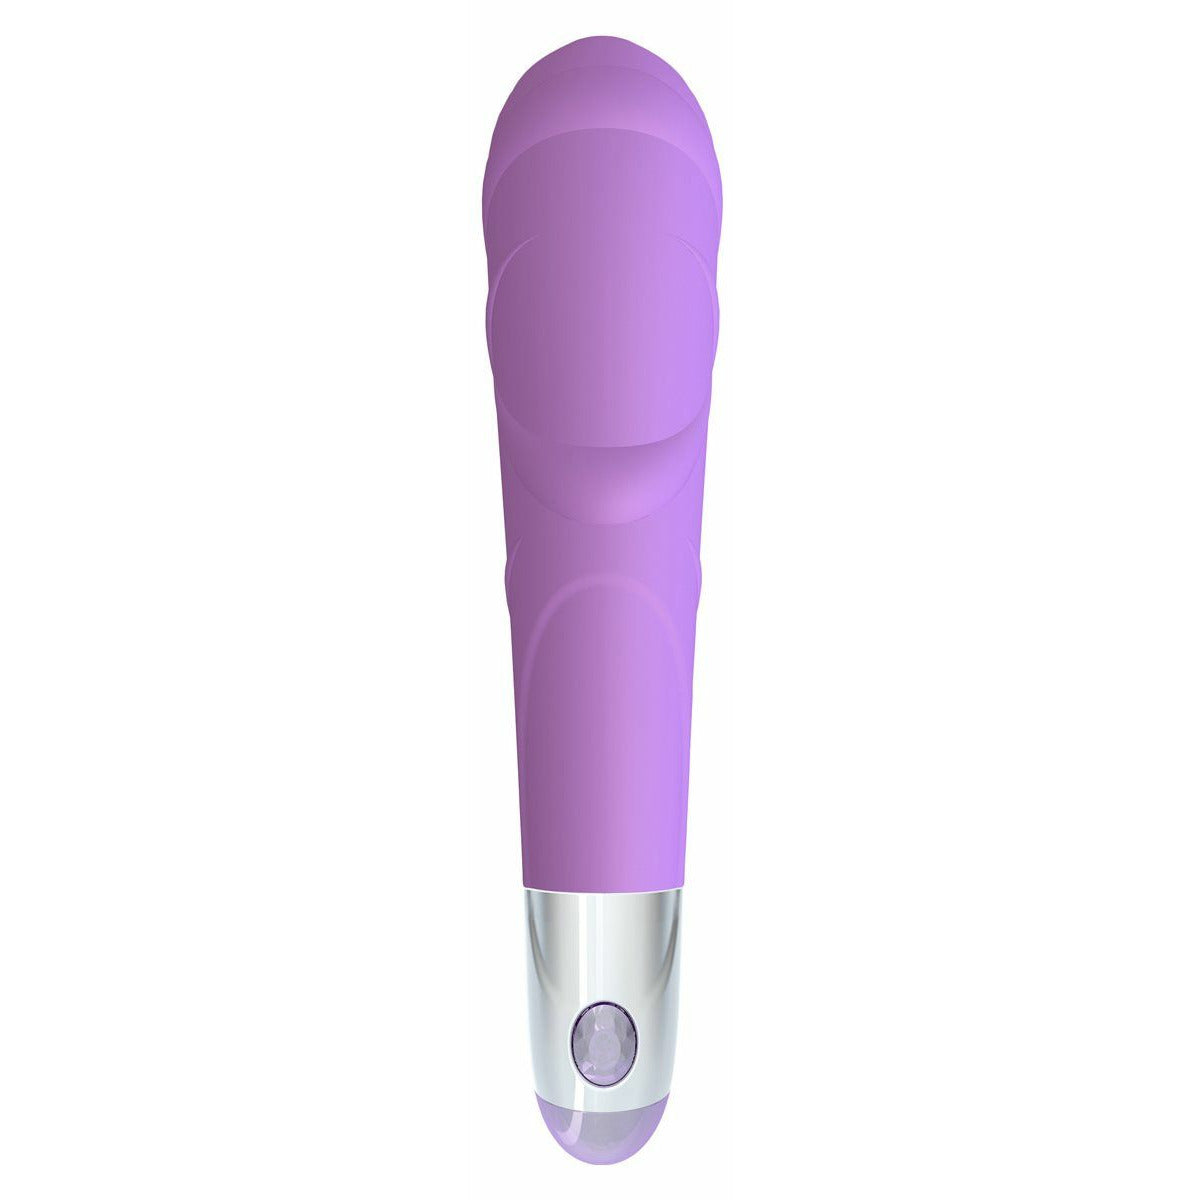 Mae B Lovely Vibes - Laced Textured Soft Touch Vibrator - Purple